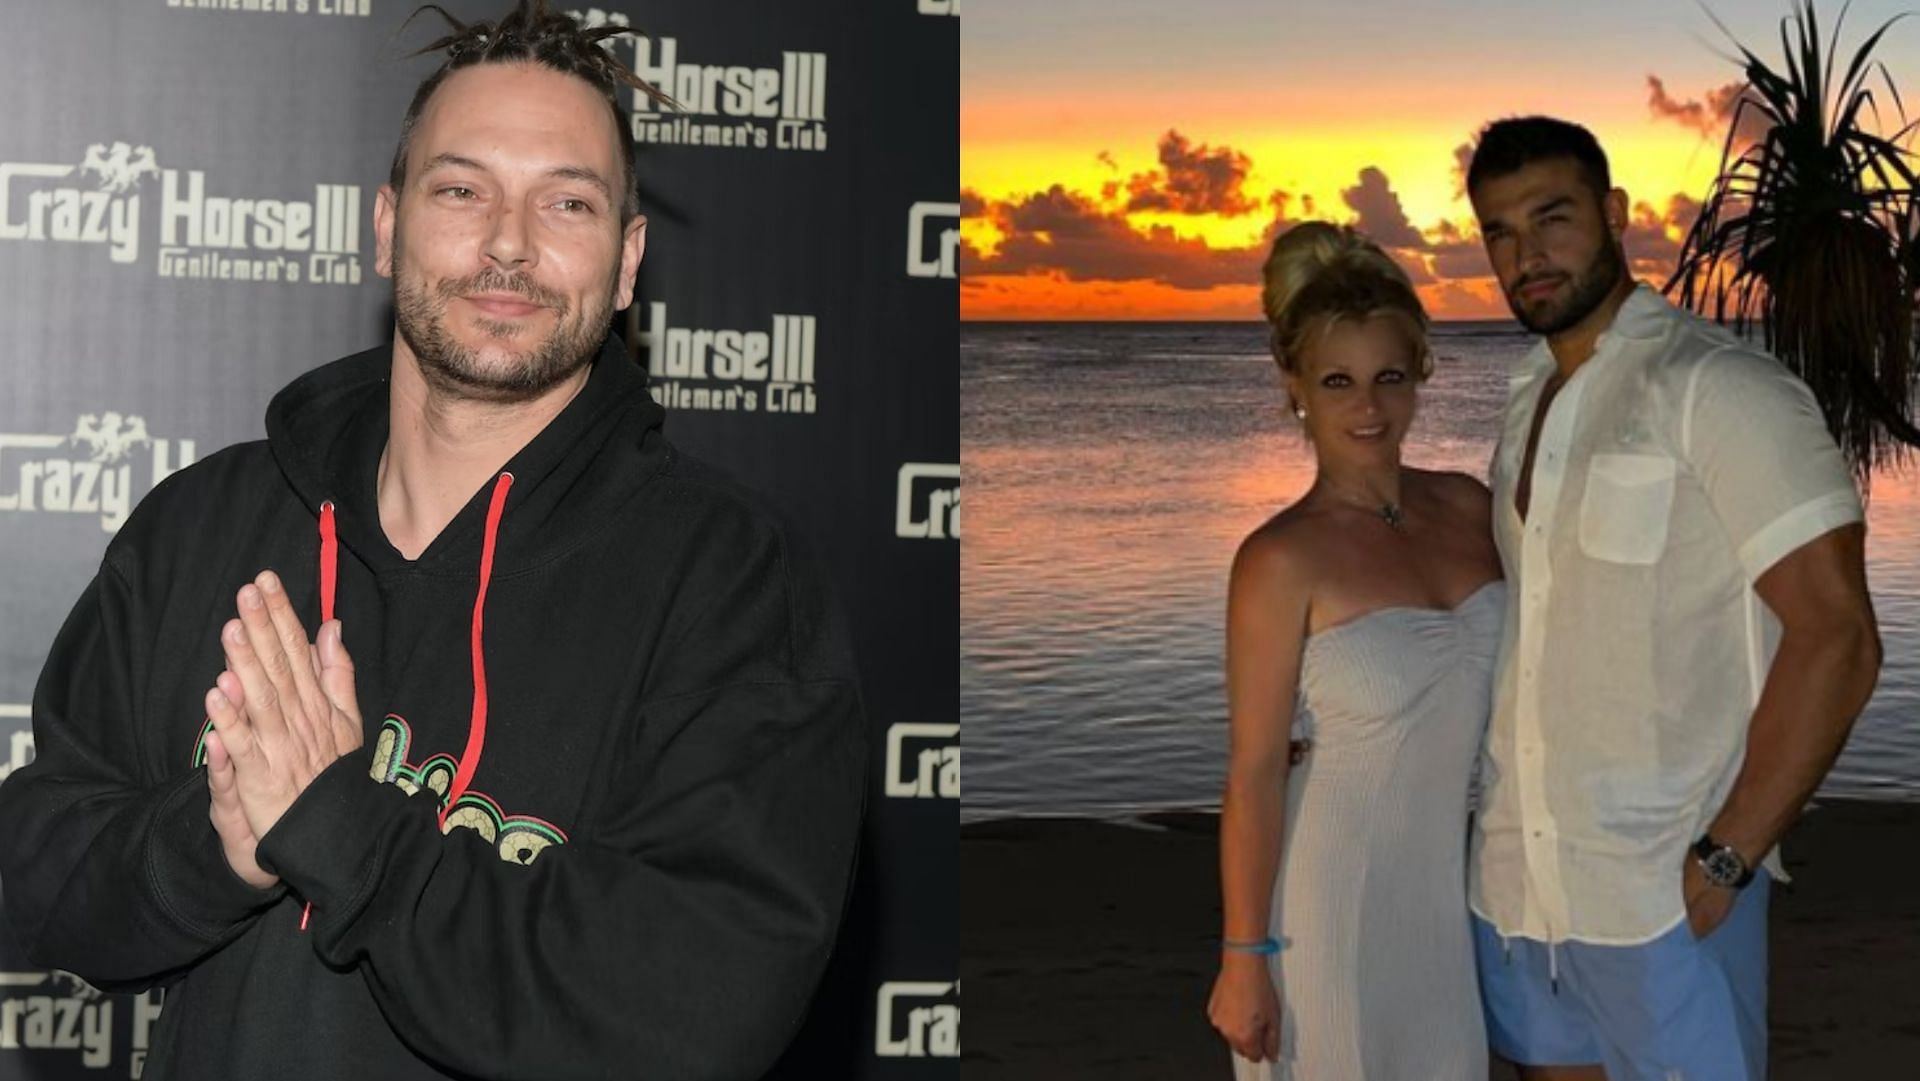 Kevin Federline made some bombshell revelations about Britney Spears and their kids in his recent interview. (Image via Bryan Steffy/Getty, @BritneySpears/Instagram)